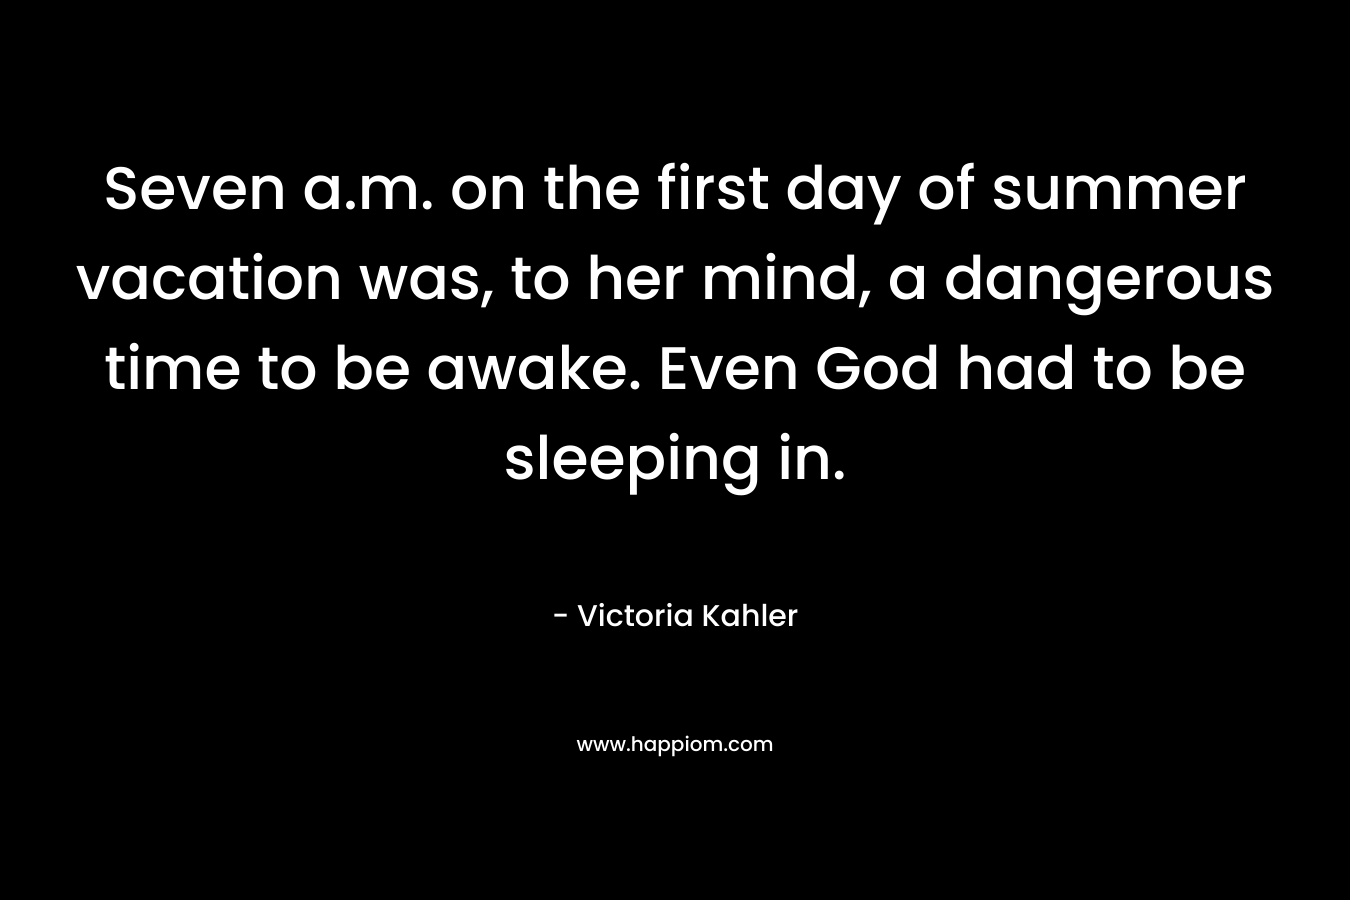 Seven a.m. on the first day of summer vacation was, to her mind, a dangerous time to be awake. Even God had to be sleeping in. – Victoria Kahler